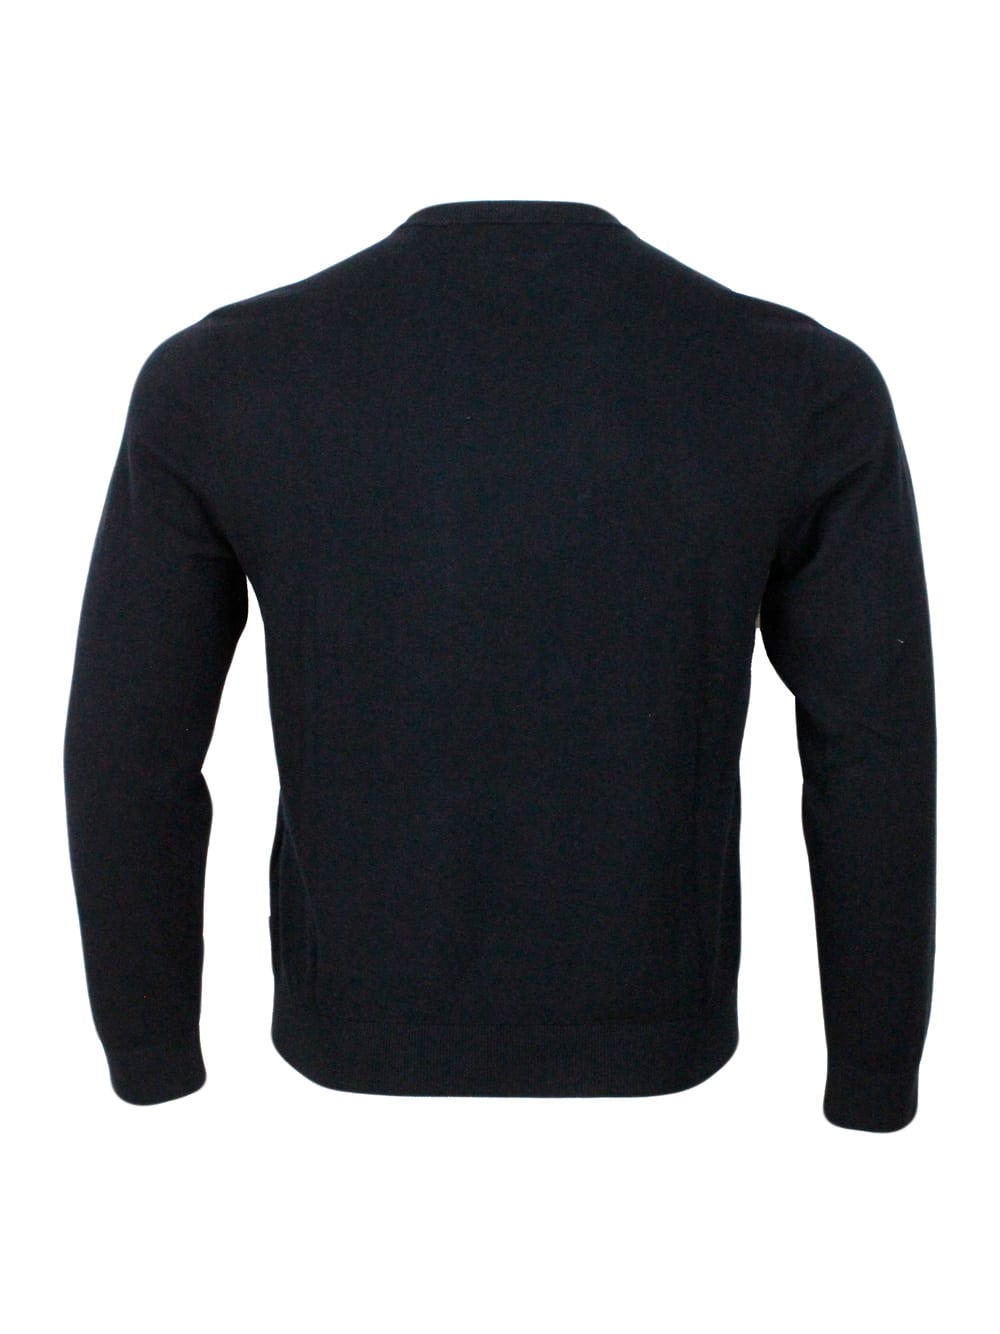 Shop Armani Collezioni Lightweight Long-sleeved Crew-neck Sweater Made Of Warm Cotton And Cashmere With Contrasting Color P In Black